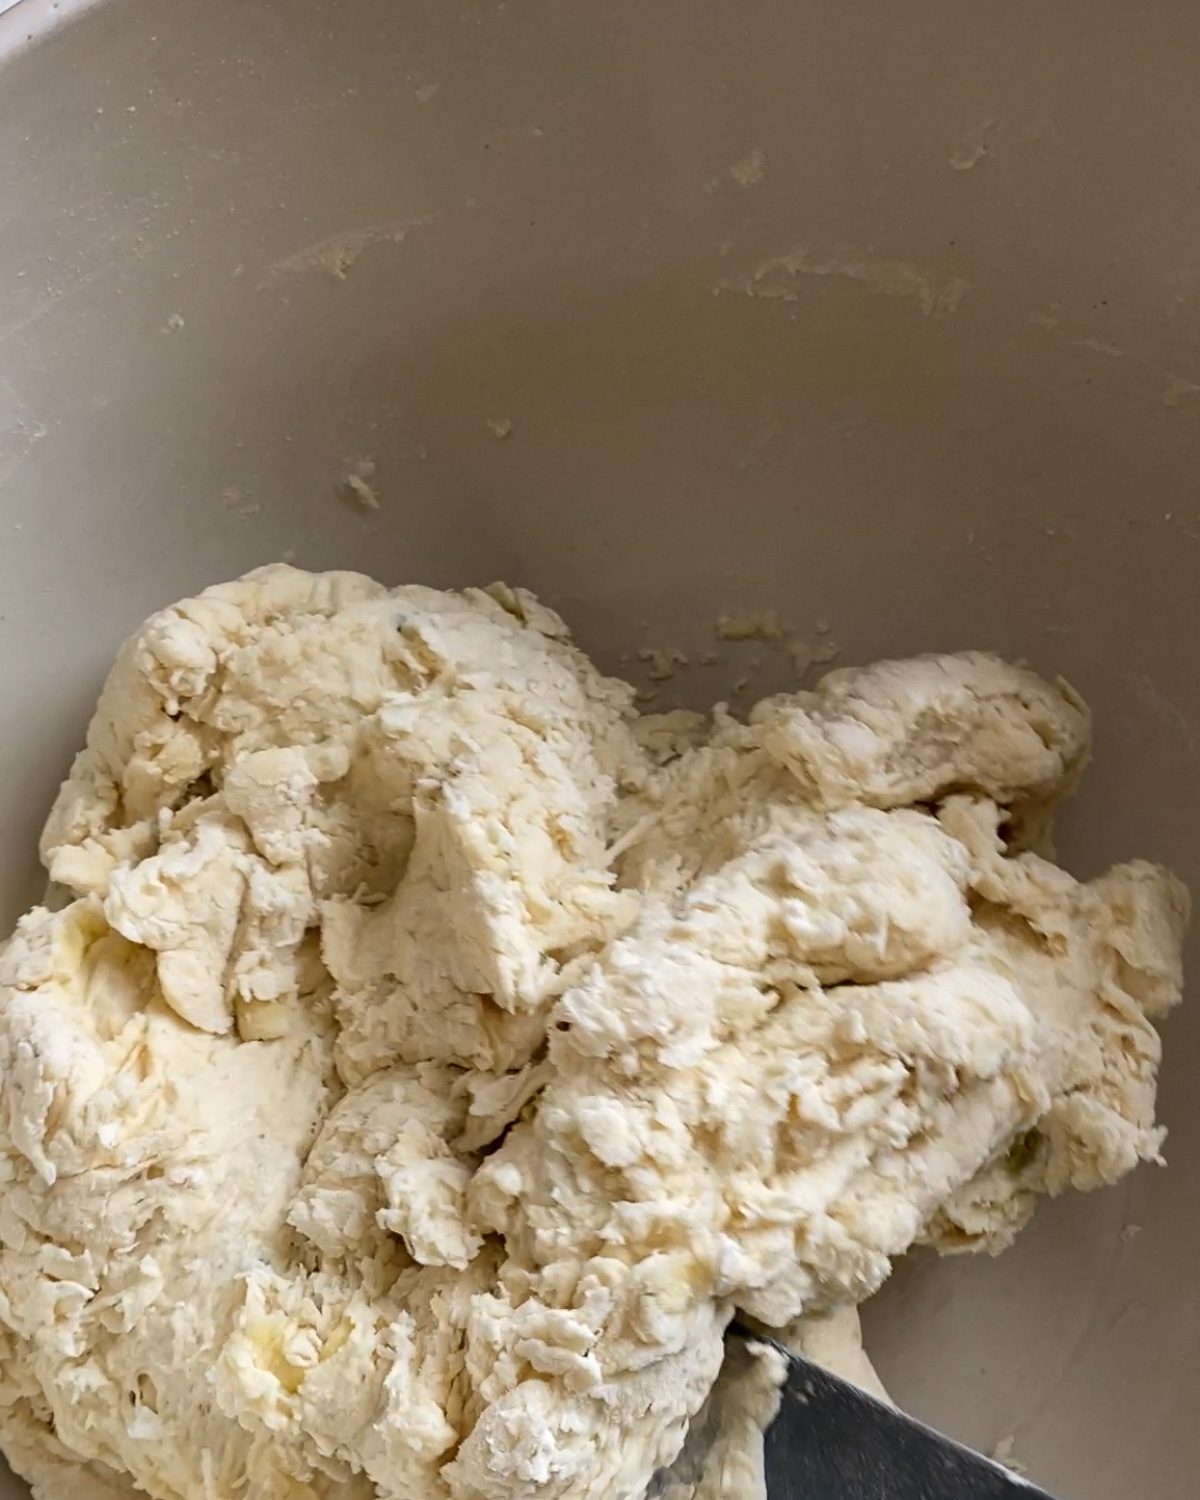 process of forming dough from flour mixture in bowl